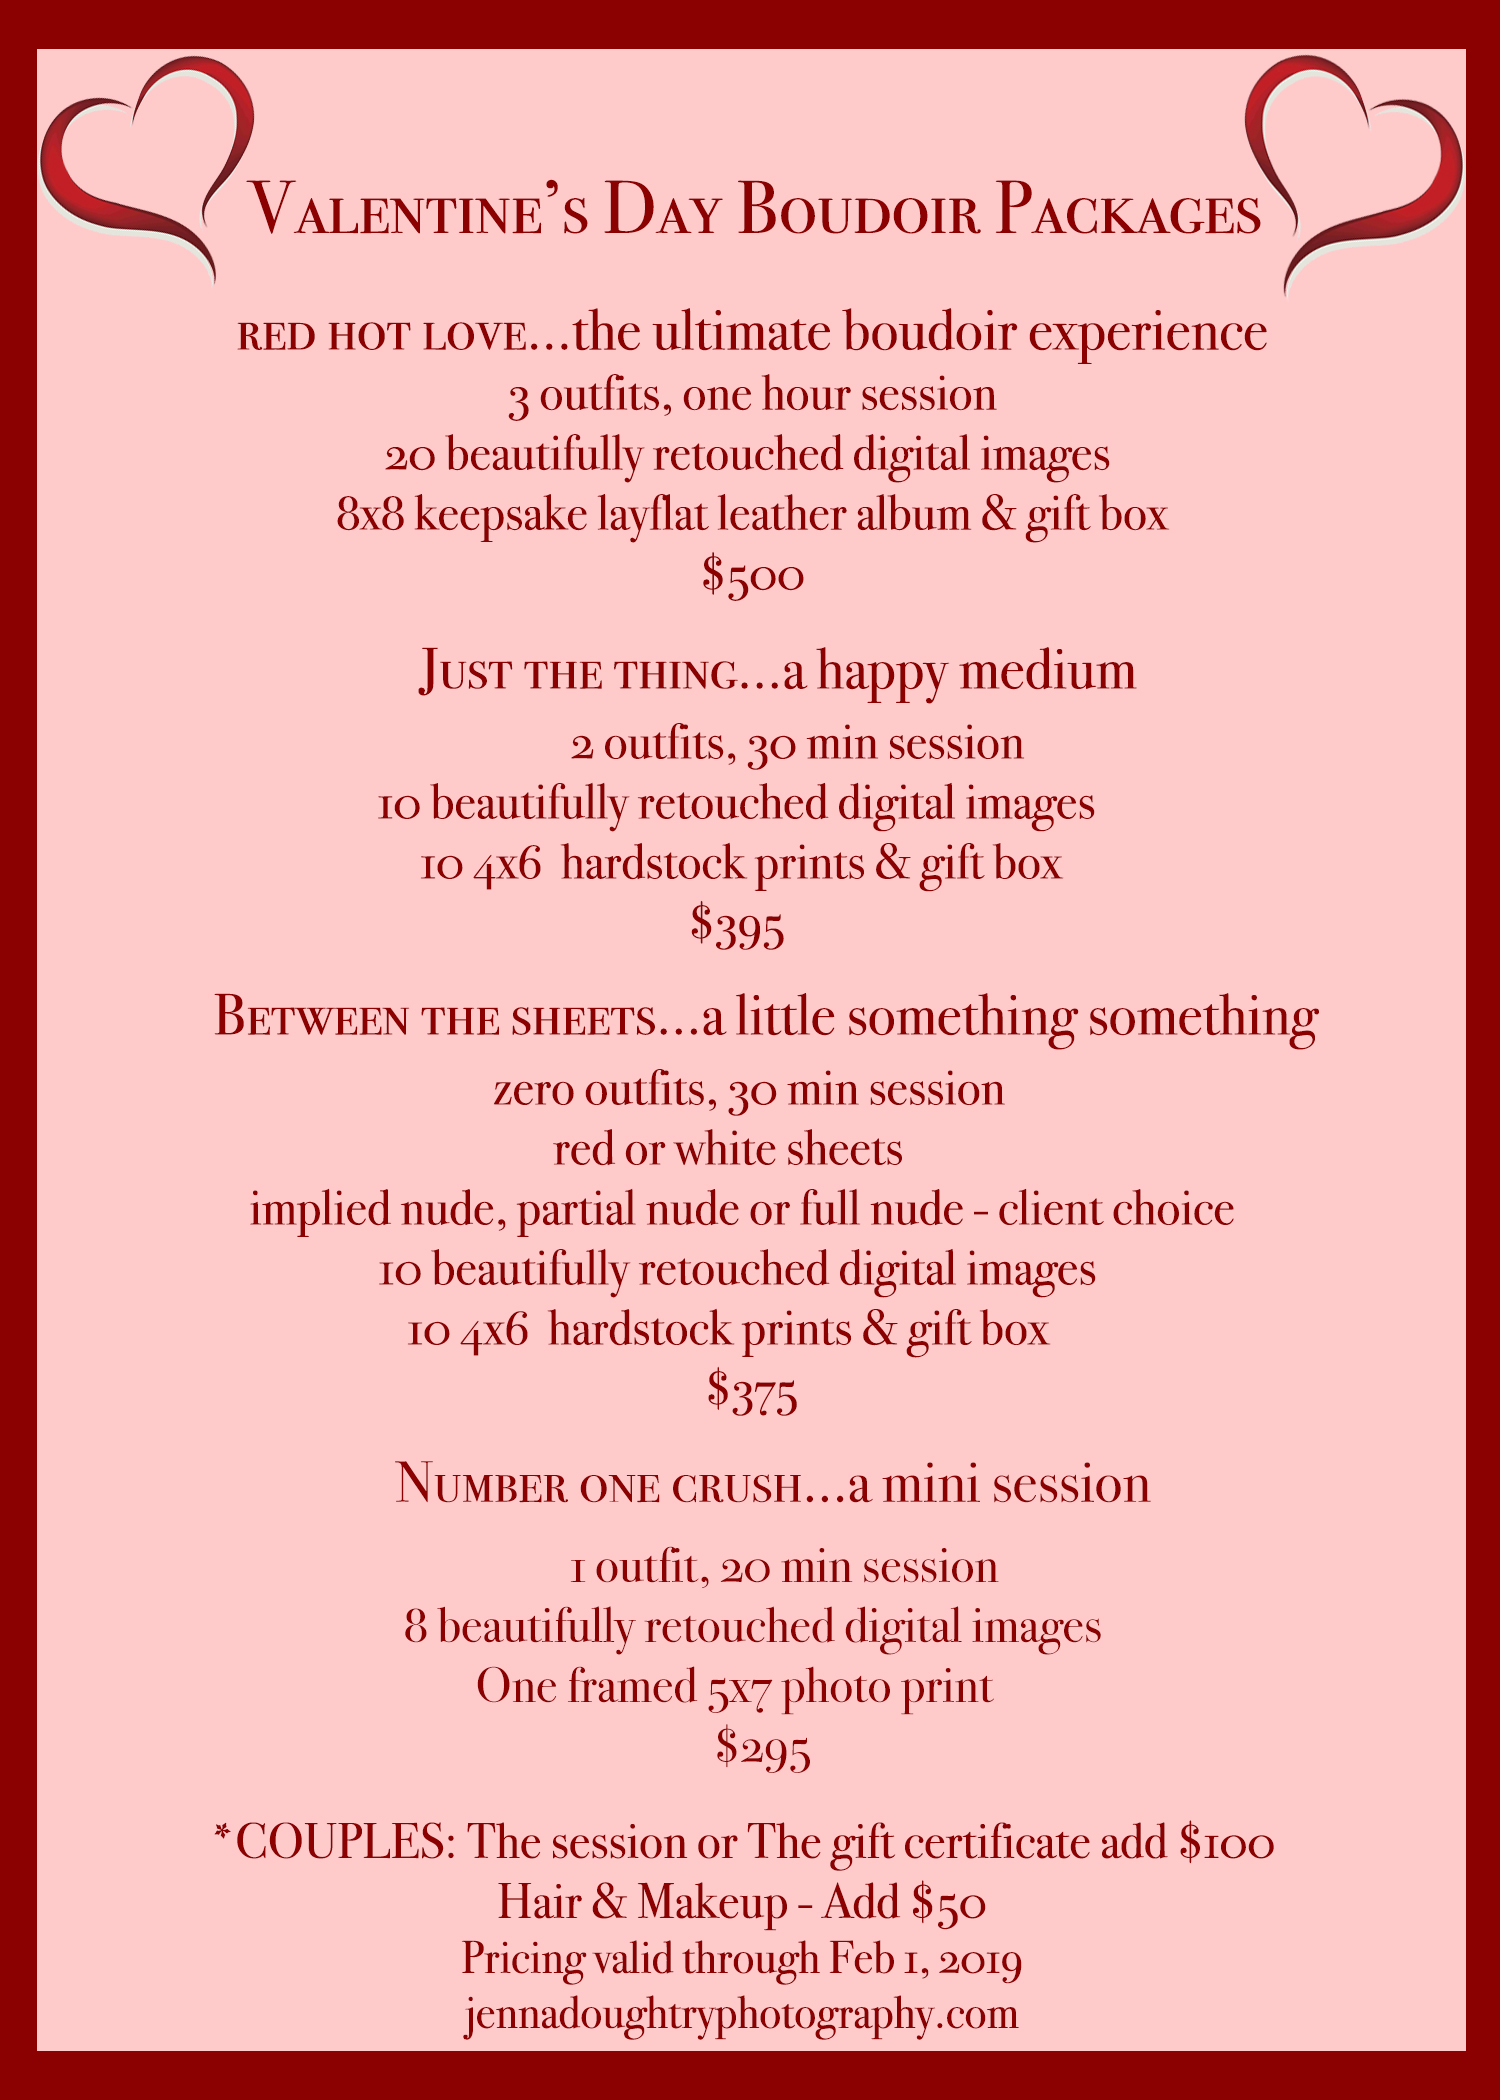 Maine Boudoir Valentine's Day Packages